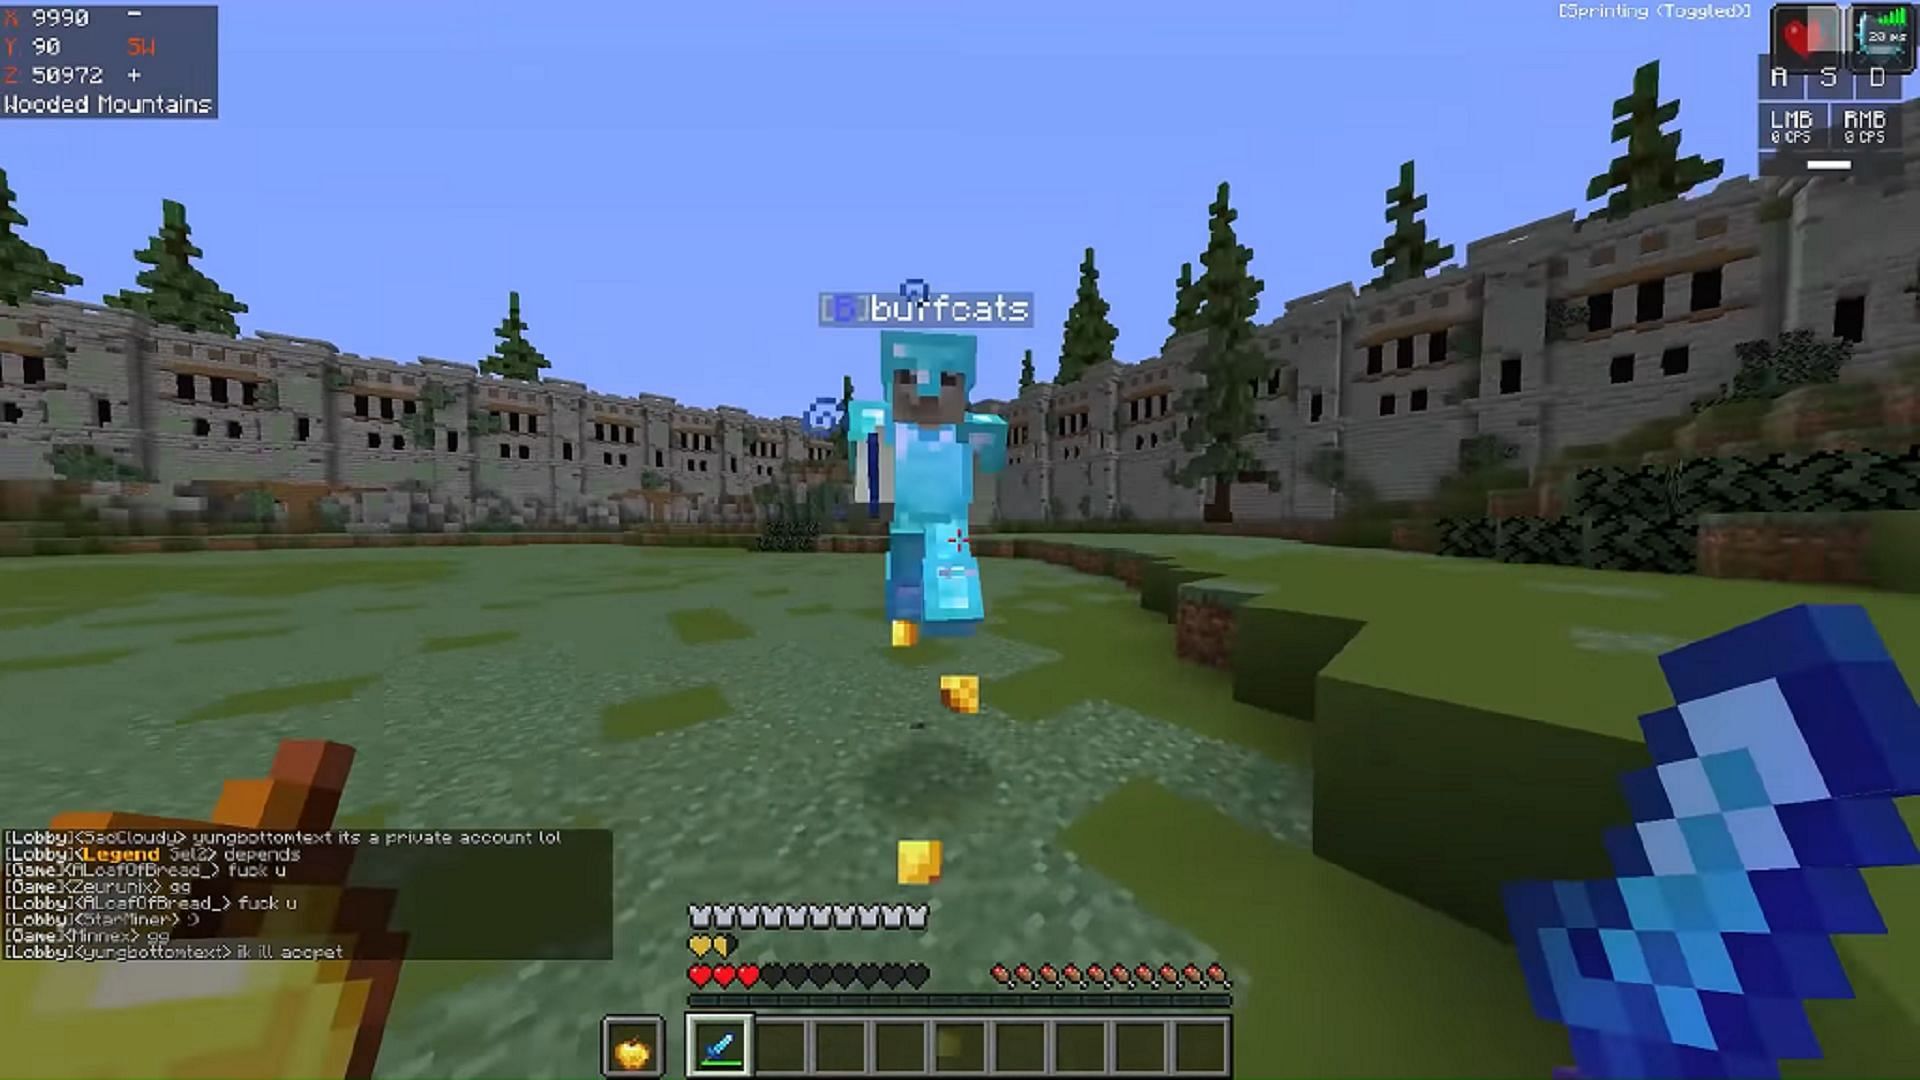 Two players engaged in PvP battle in an arena (Image via Mojang)